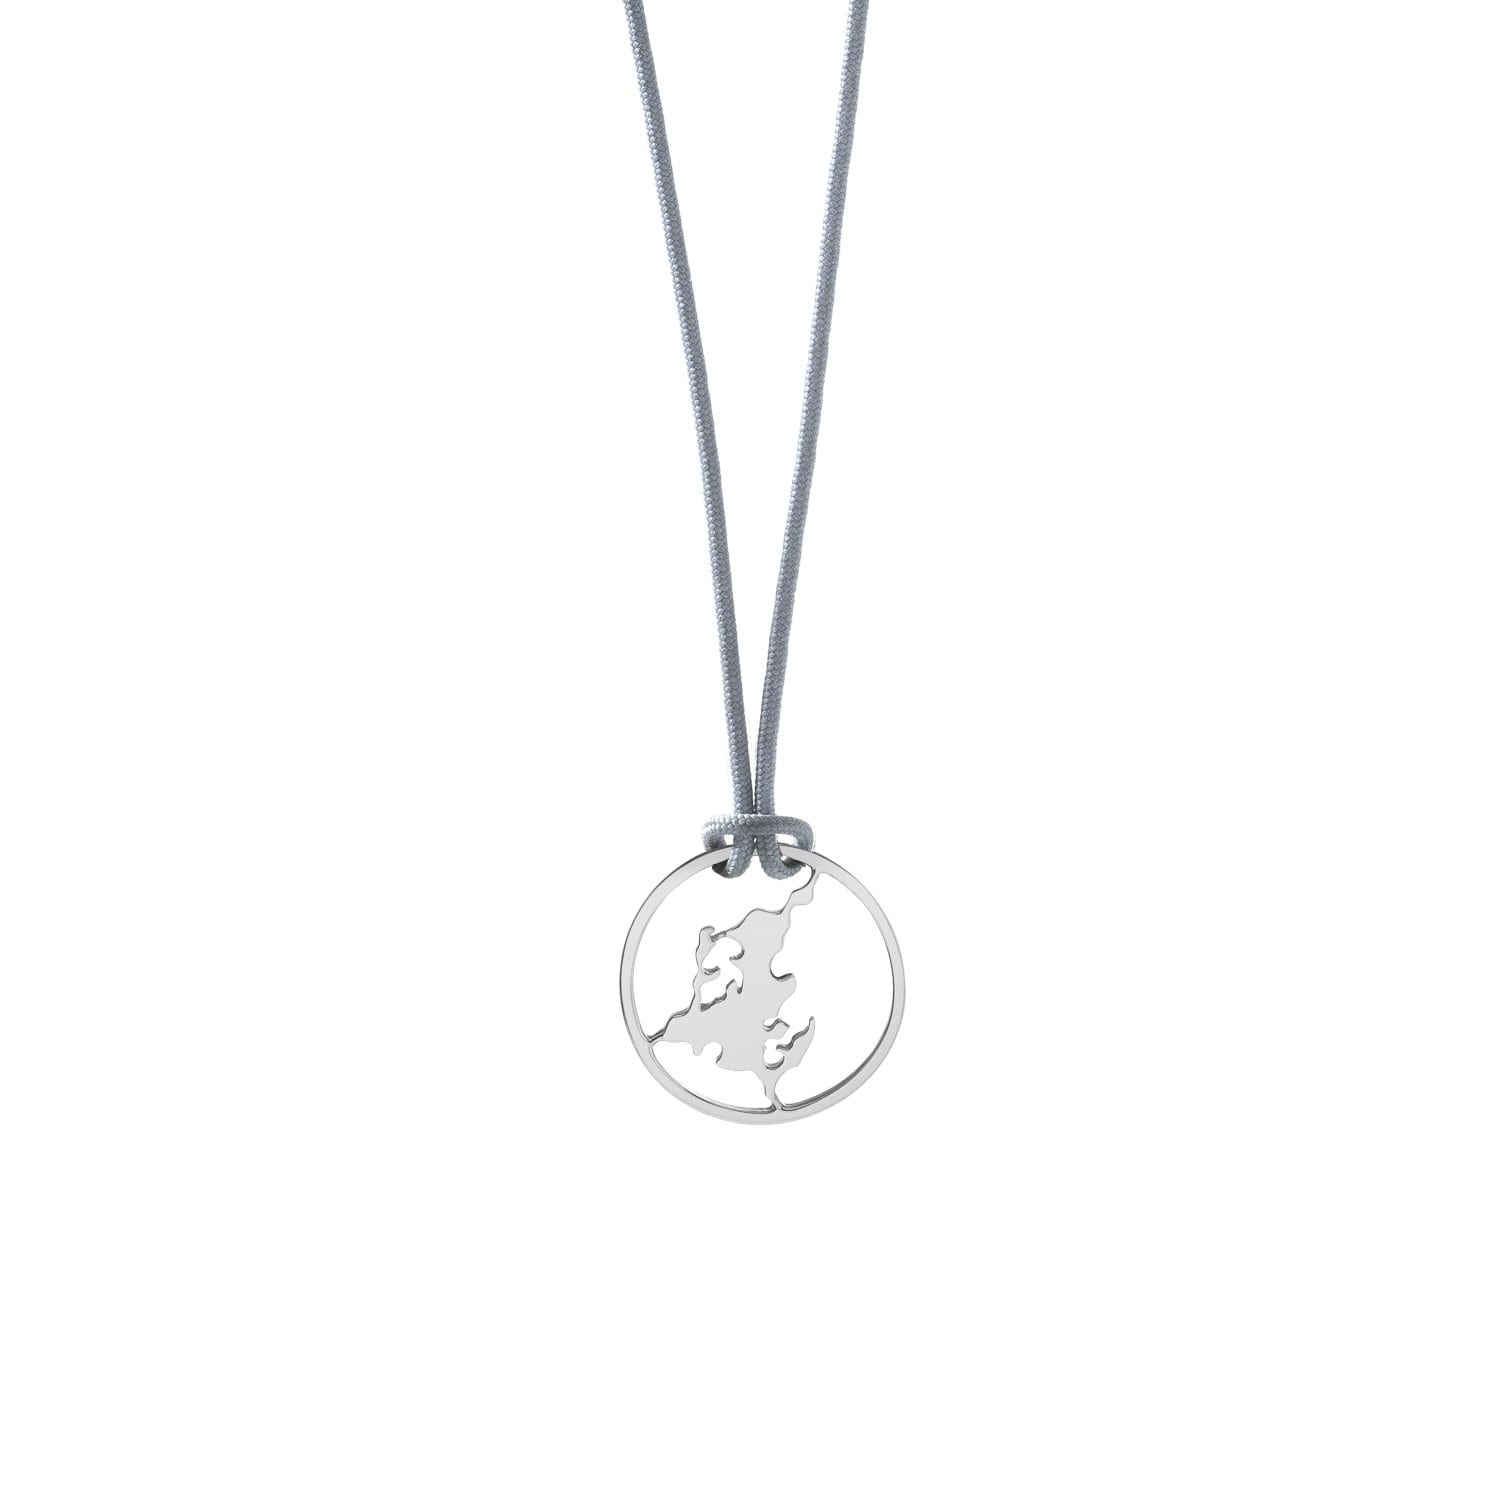 CD Charms | Shelter Island Necklace | Catherine Demarchelier